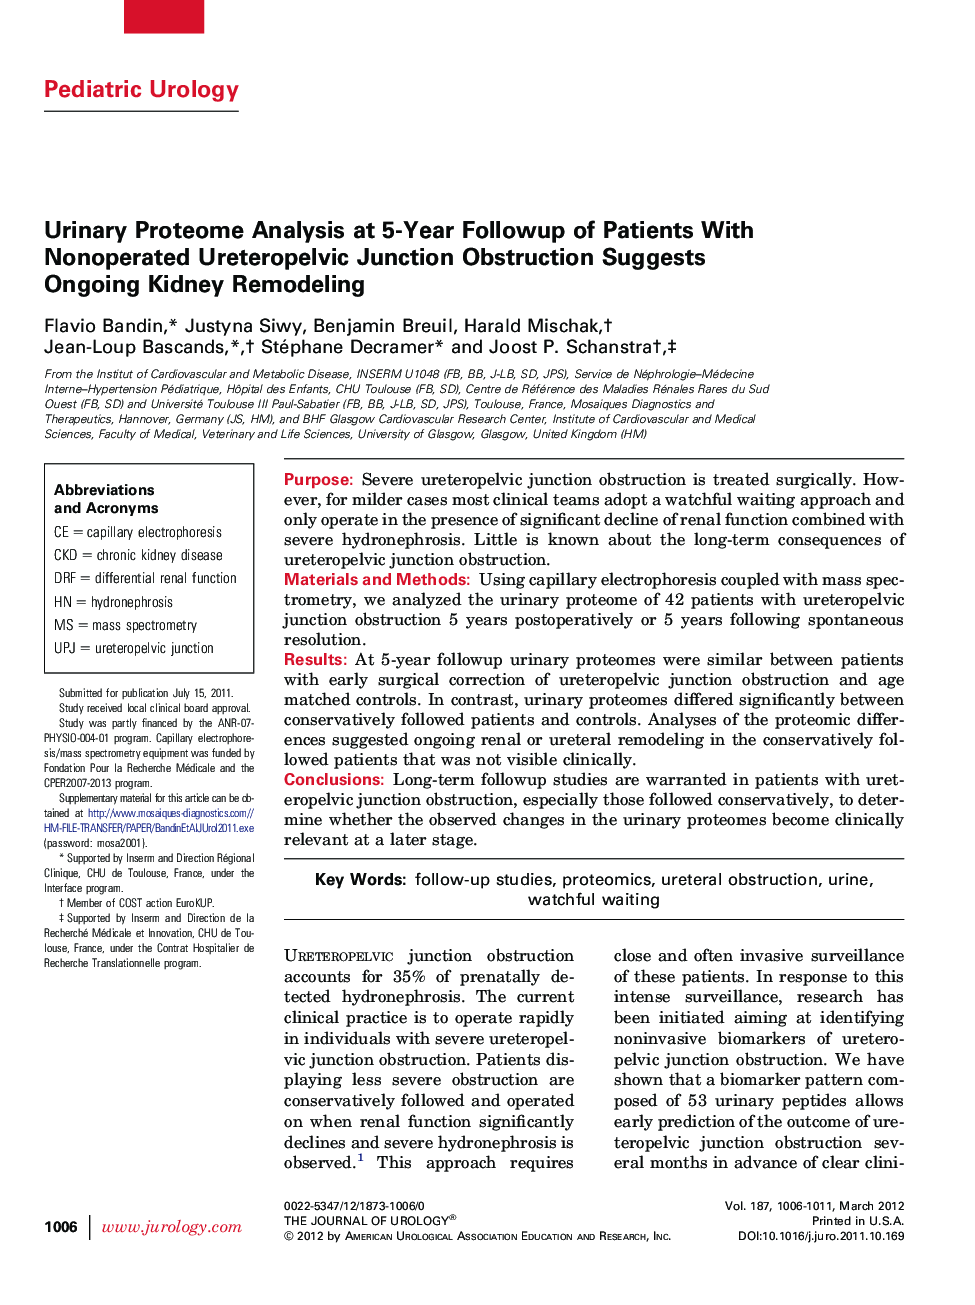 Urinary Proteome Analysis at 5-Year Followup of Patients With Nonoperated Ureteropelvic Junction Obstruction Suggests Ongoing Kidney Remodeling 